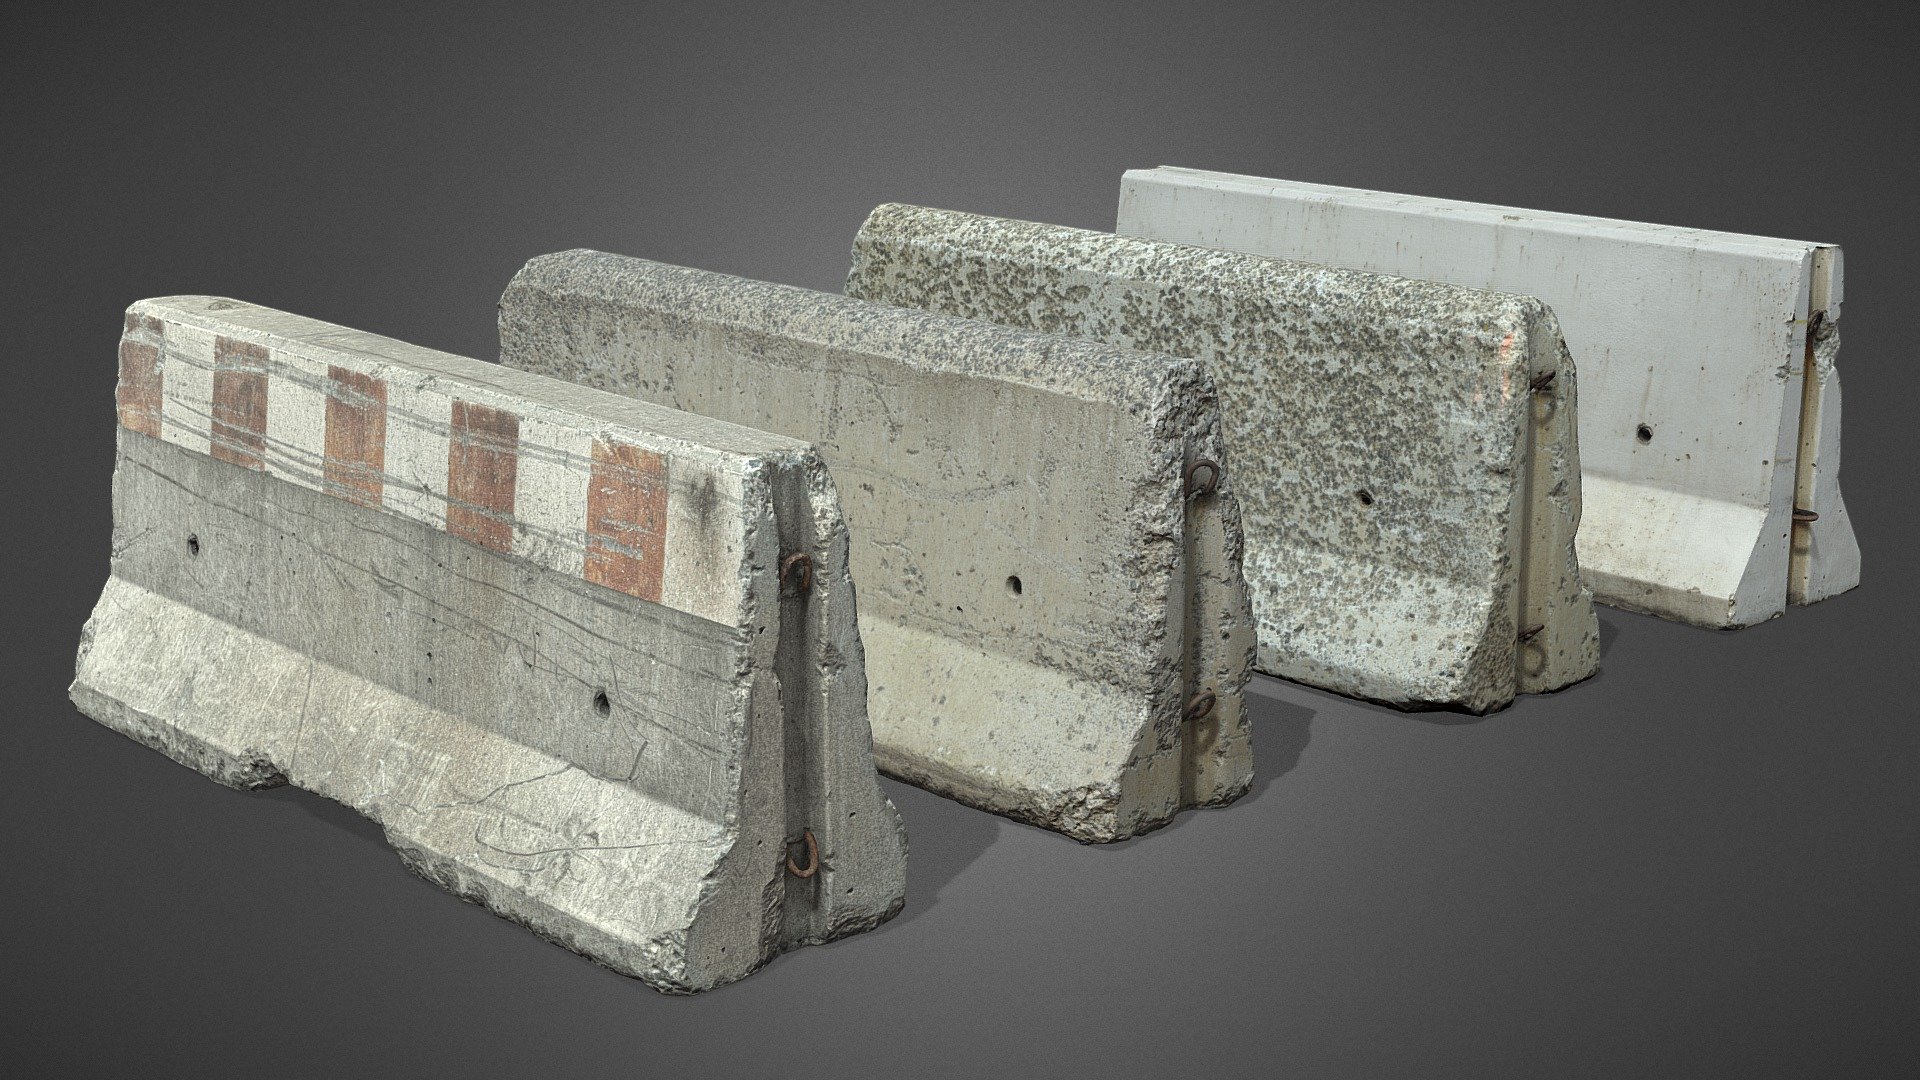 Set of four concrete road barrier models. Models are based on high fidelity photogrammetry scans therefore they look very realistic. Each one has set of 4K PBR textures (diffuse, metallic, normal, roughness, ambient occlusion). Models are retopologized (mid poly) and ready to use in Unity / Unreal or just render in software like Blender.  There are obj and fbx files in attachment. Also a .blend file with materials and basic lighting set up 3d model